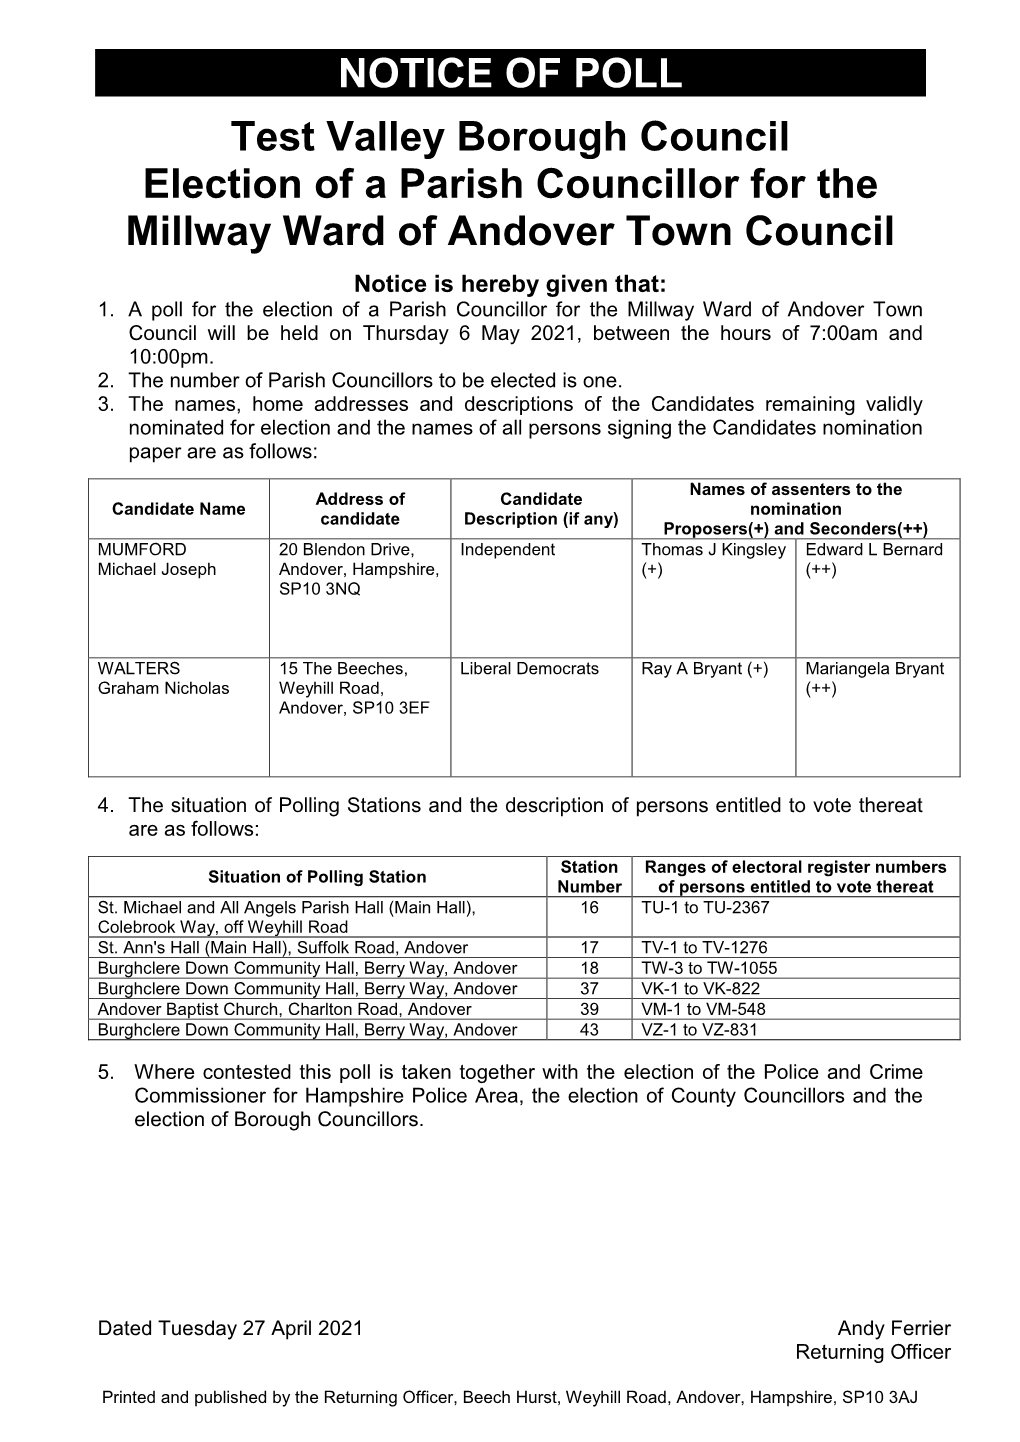 NOTICE of POLL Test Valley Borough Council Election of A